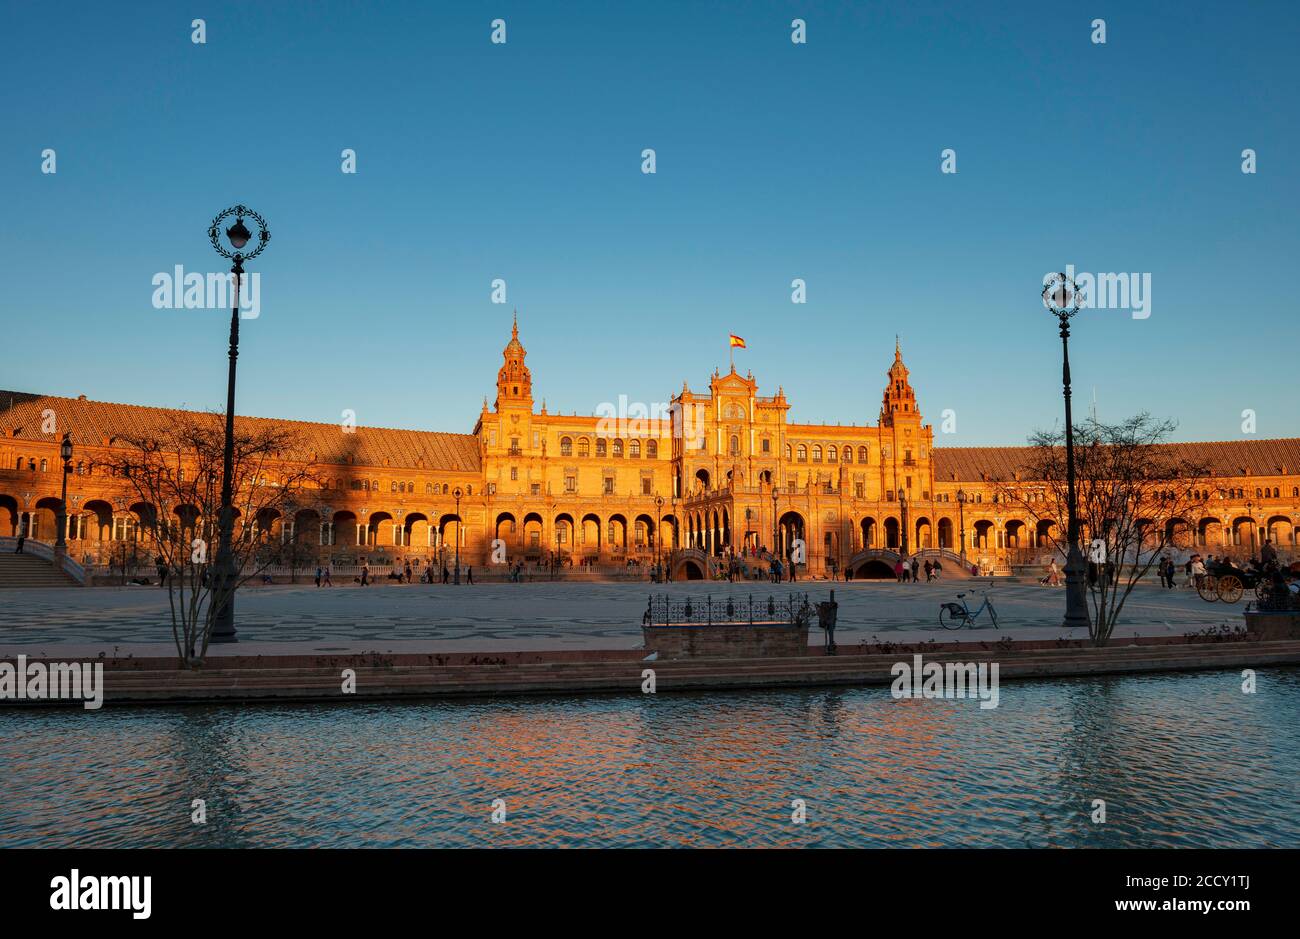 Main building at Plaza de Espana in the evening light, sunset, Sevilla, Andalusia, Spain Stock Photo